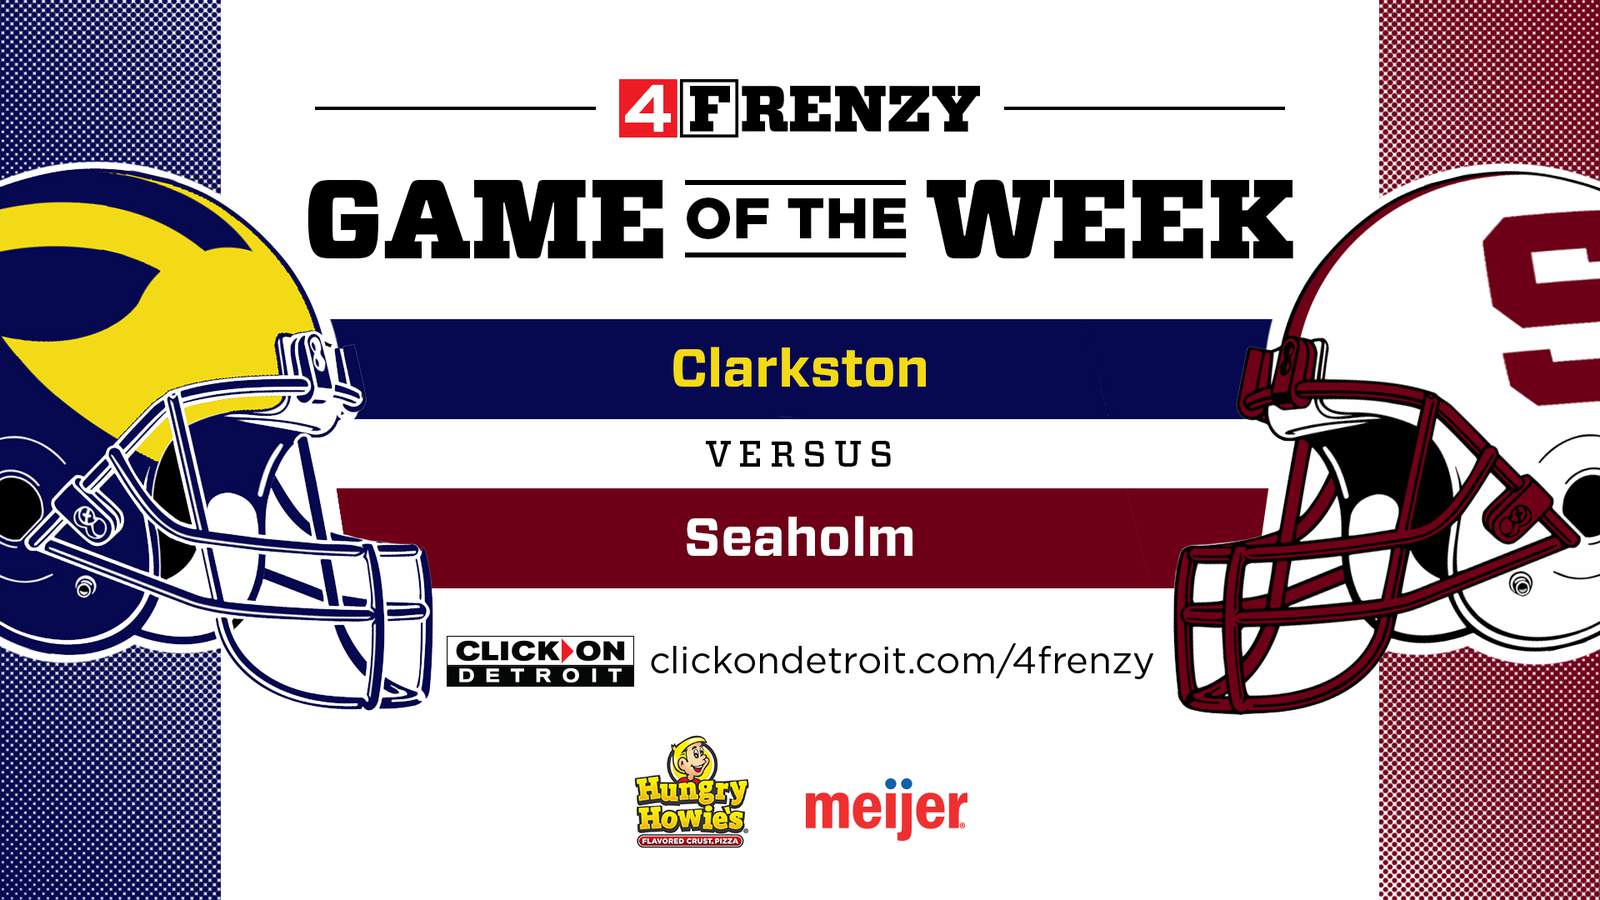 4Frenzy ‘Game of the Week’: Face-off between the Wolves and the Maples